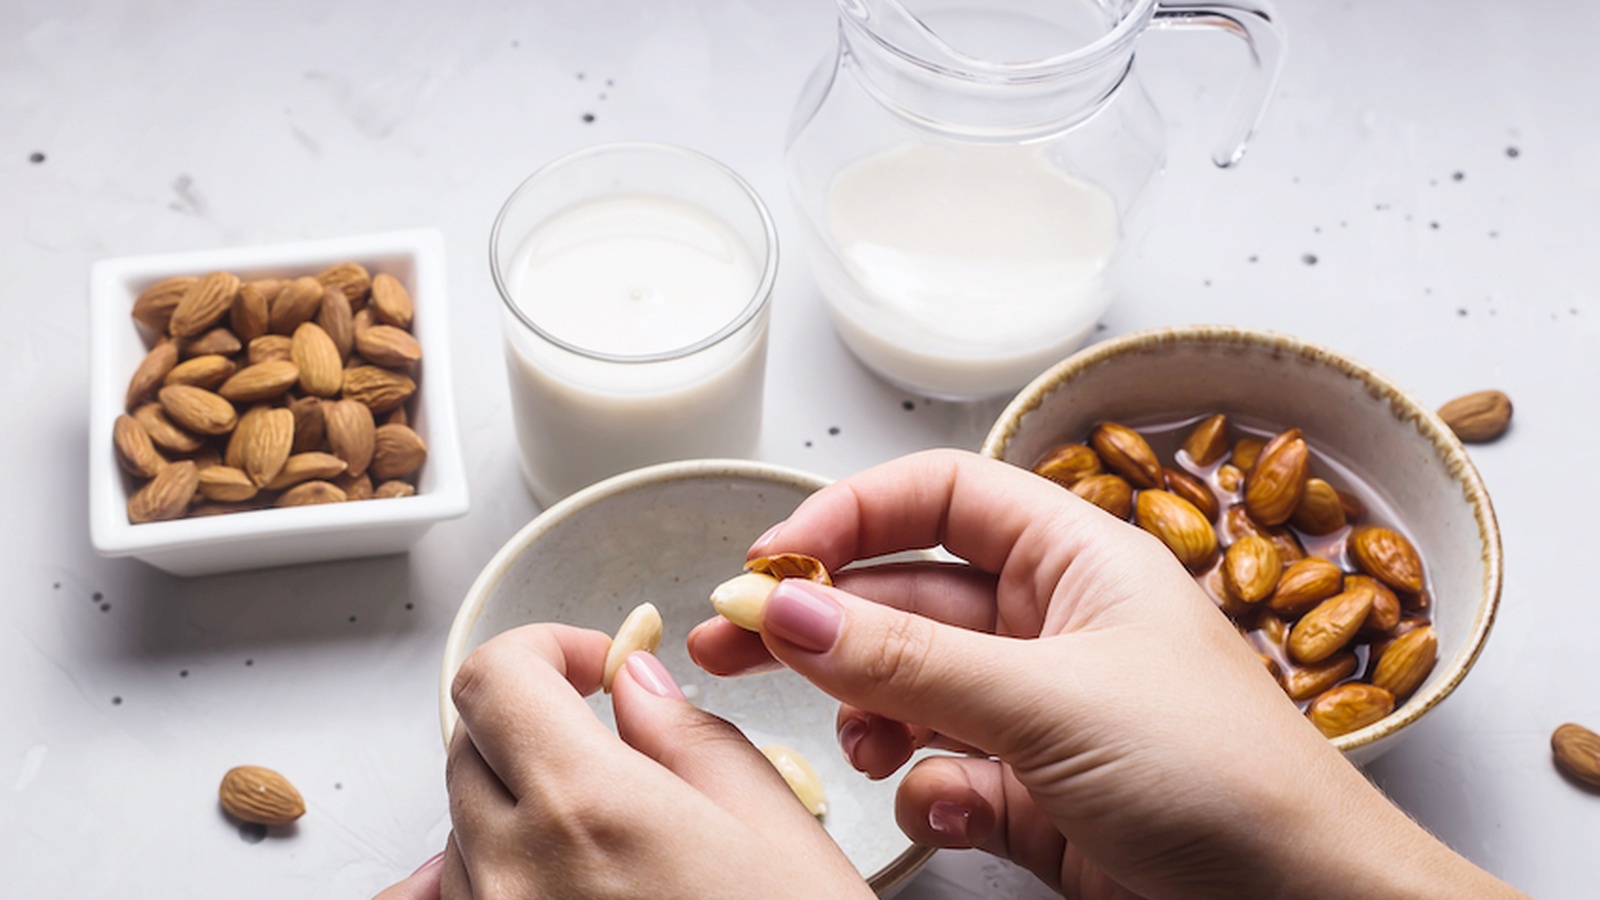 Debunking Labels: What to Look For When Buying Nut Milk